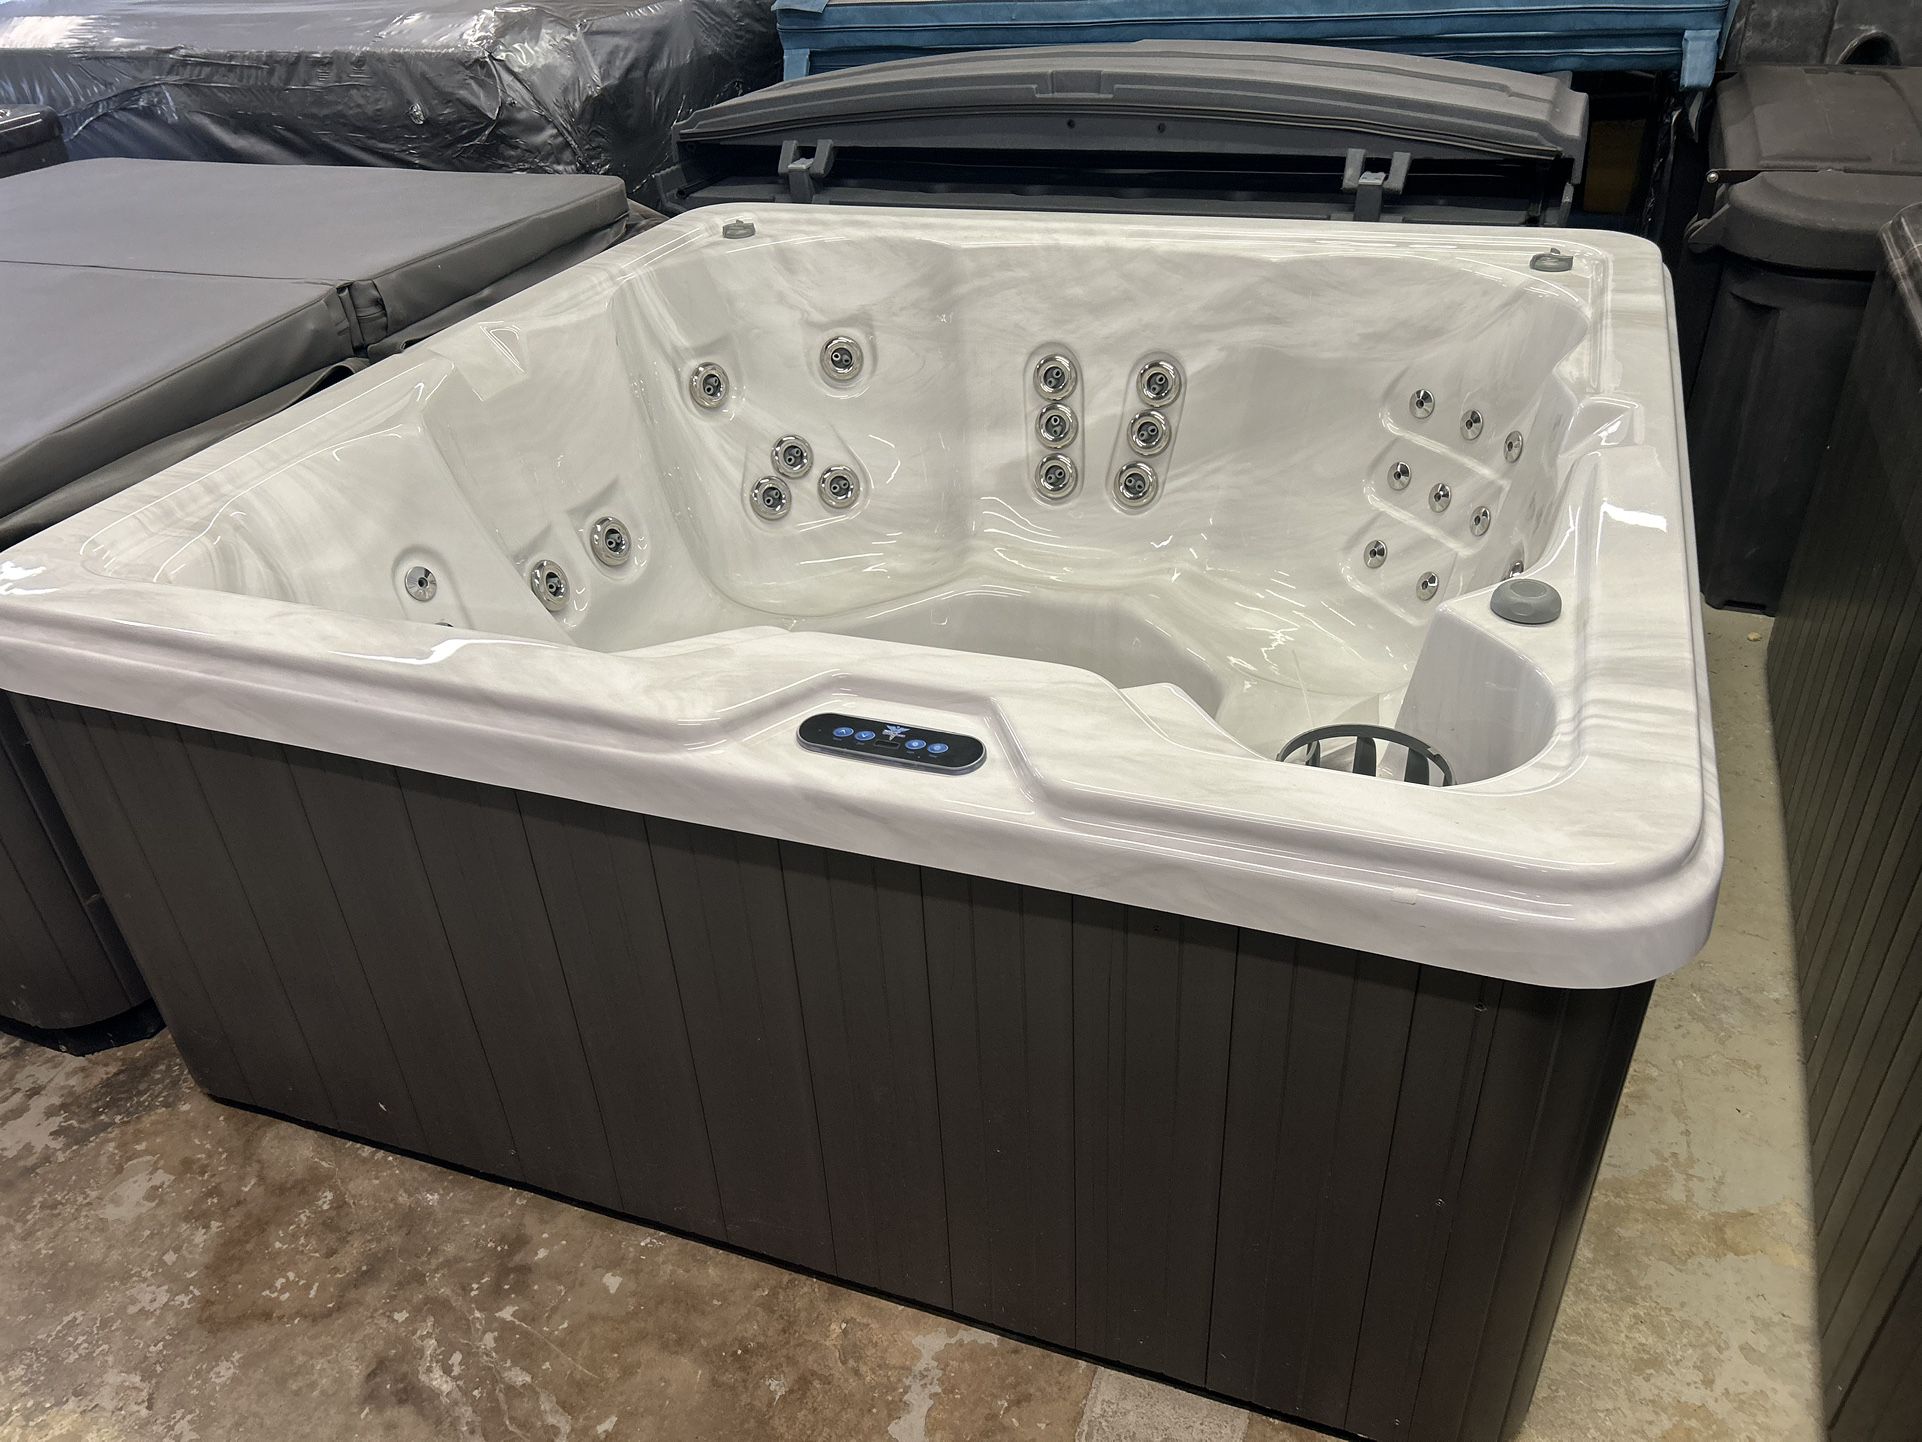 6 PERSON BRAND NEW HOT TUB SPA JACUZZI